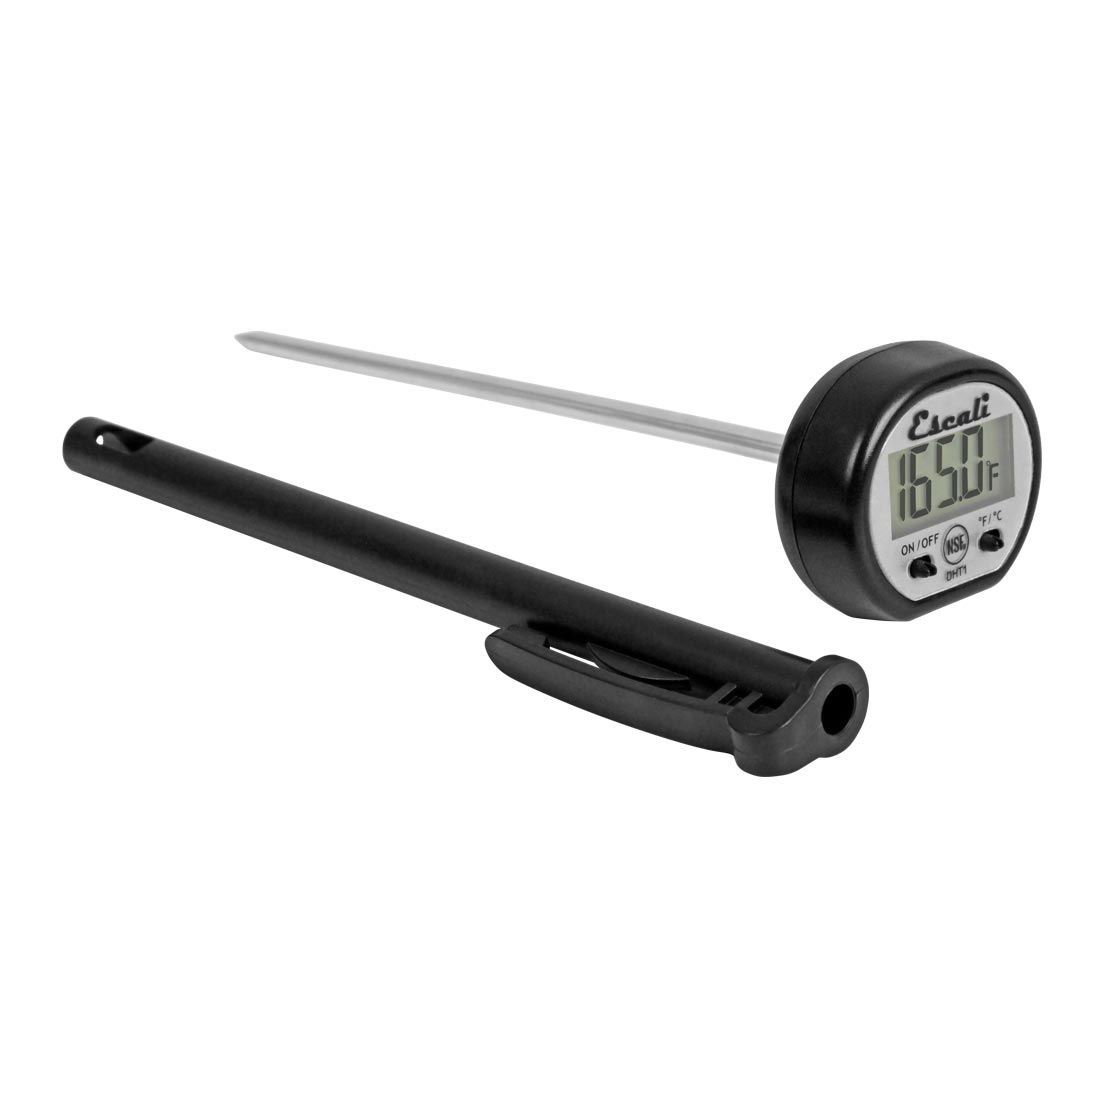 All-Clad Oven Probe Thermometer. MSRP $49.95